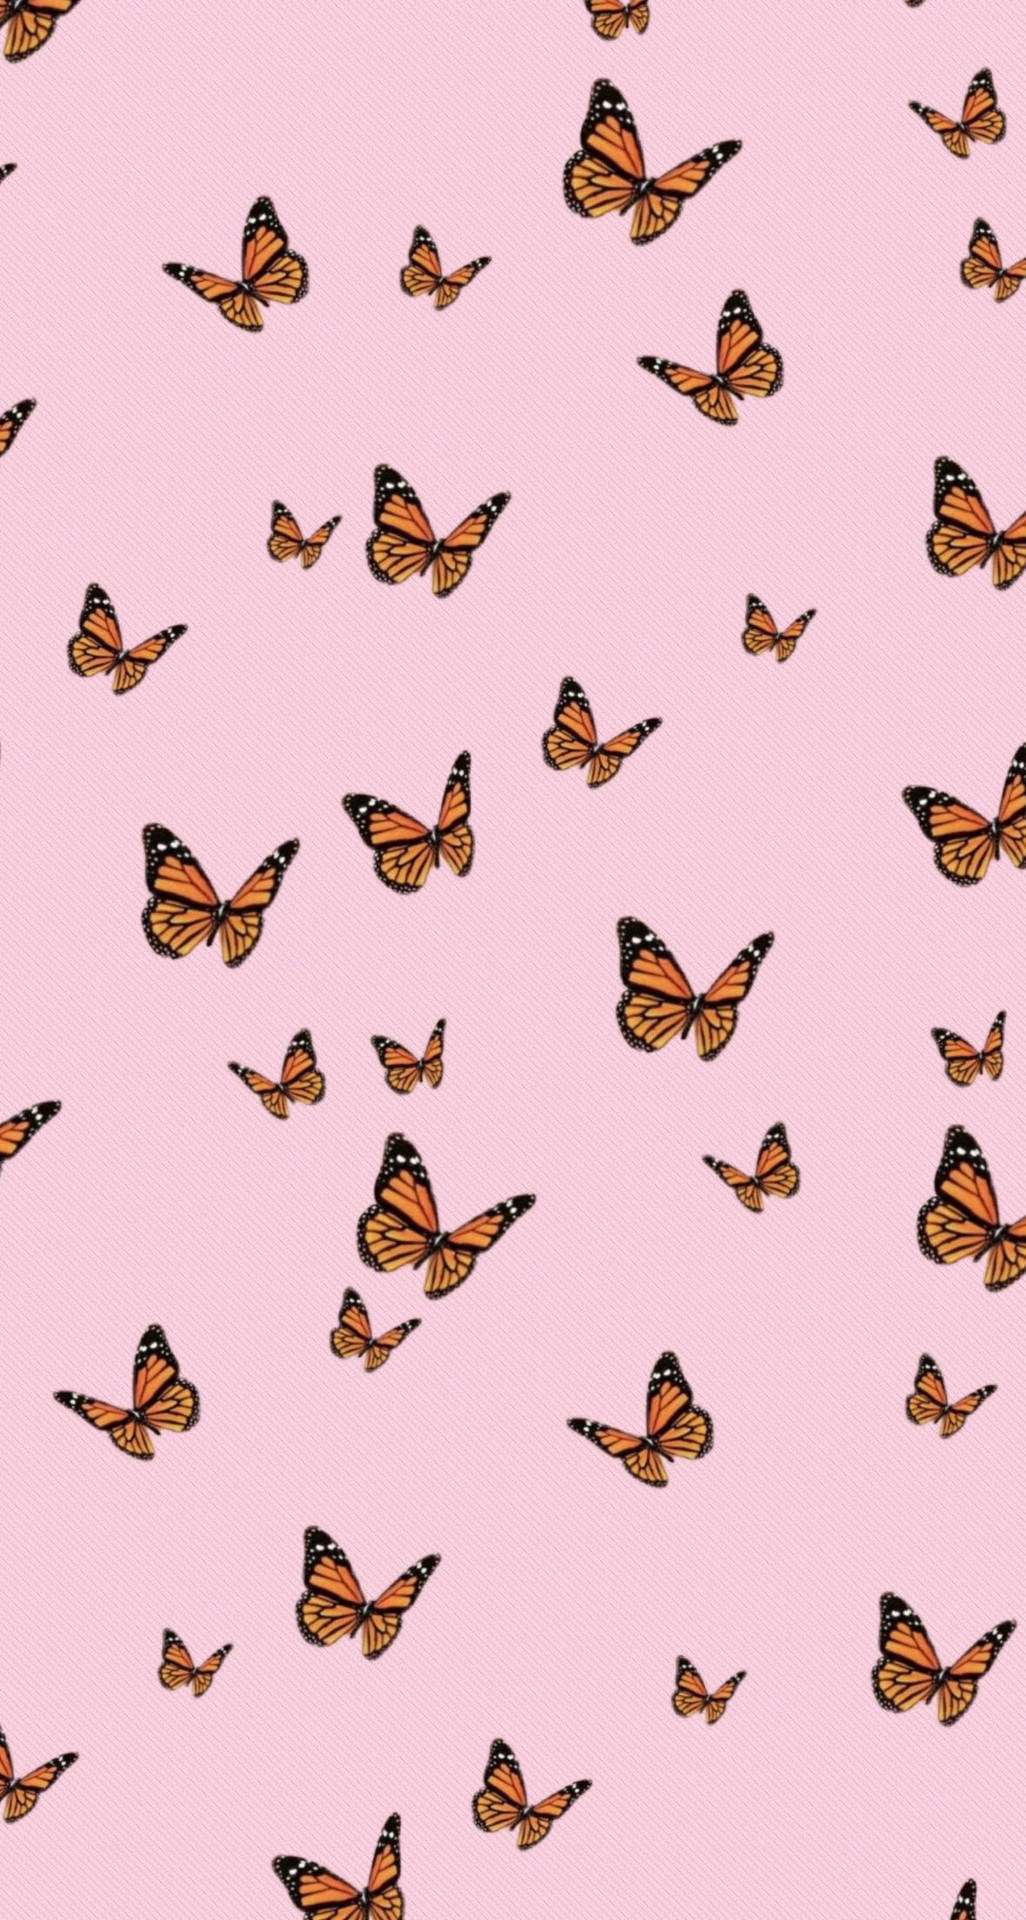 999 Pink Butterfly Pictures  Download Free Images on Unsplash